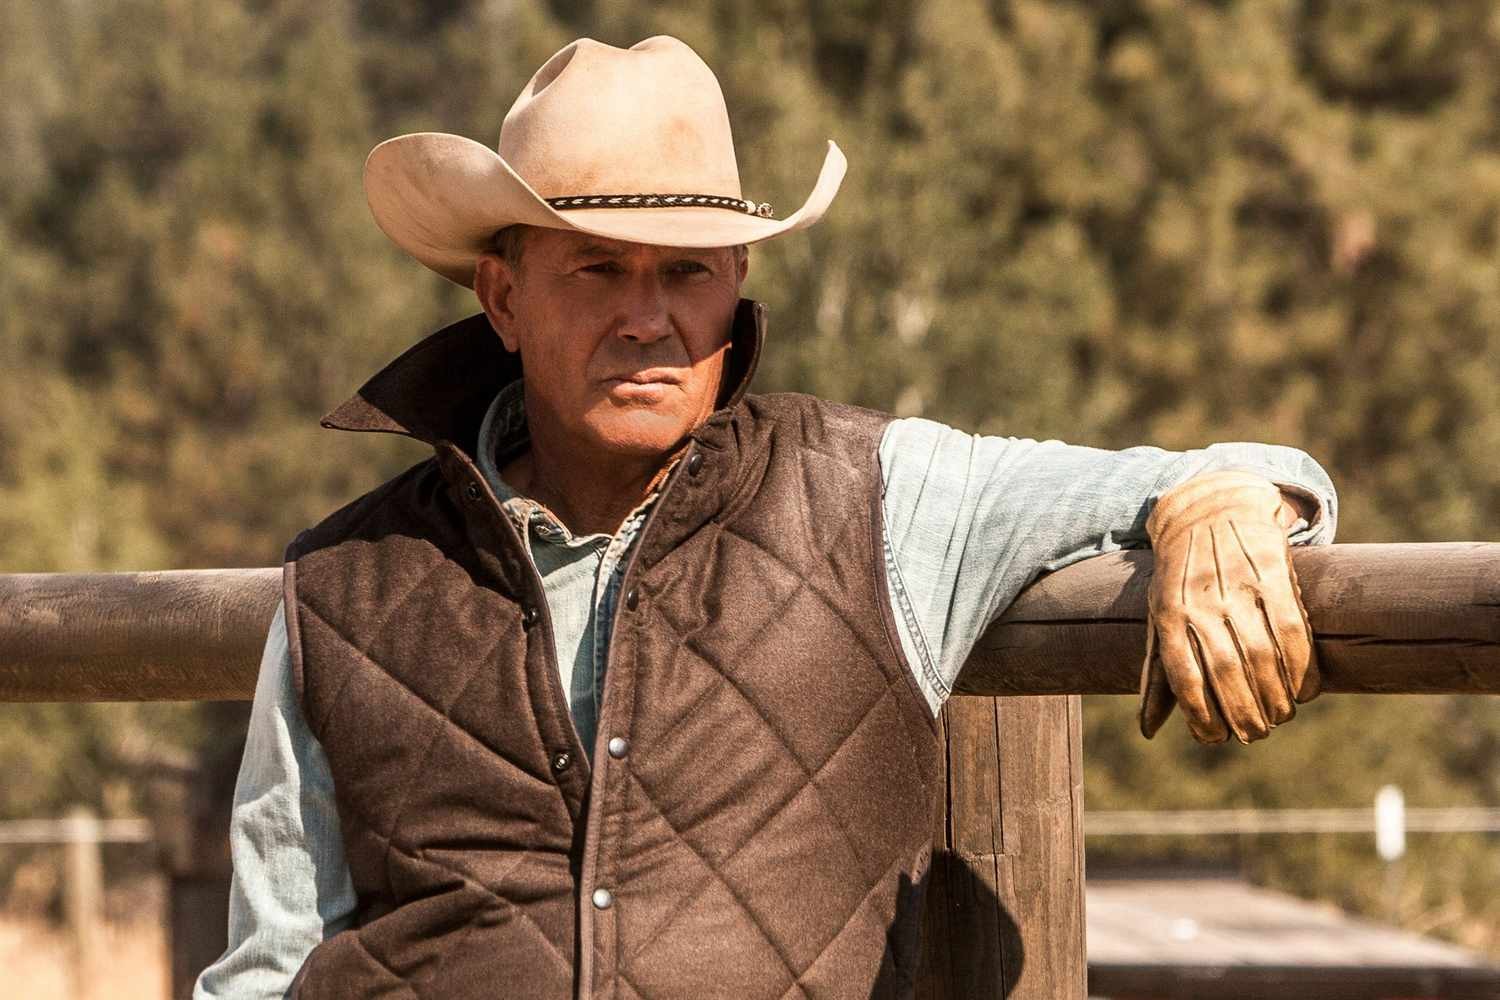 A serious-looking Kevin Costner in Yellowstone